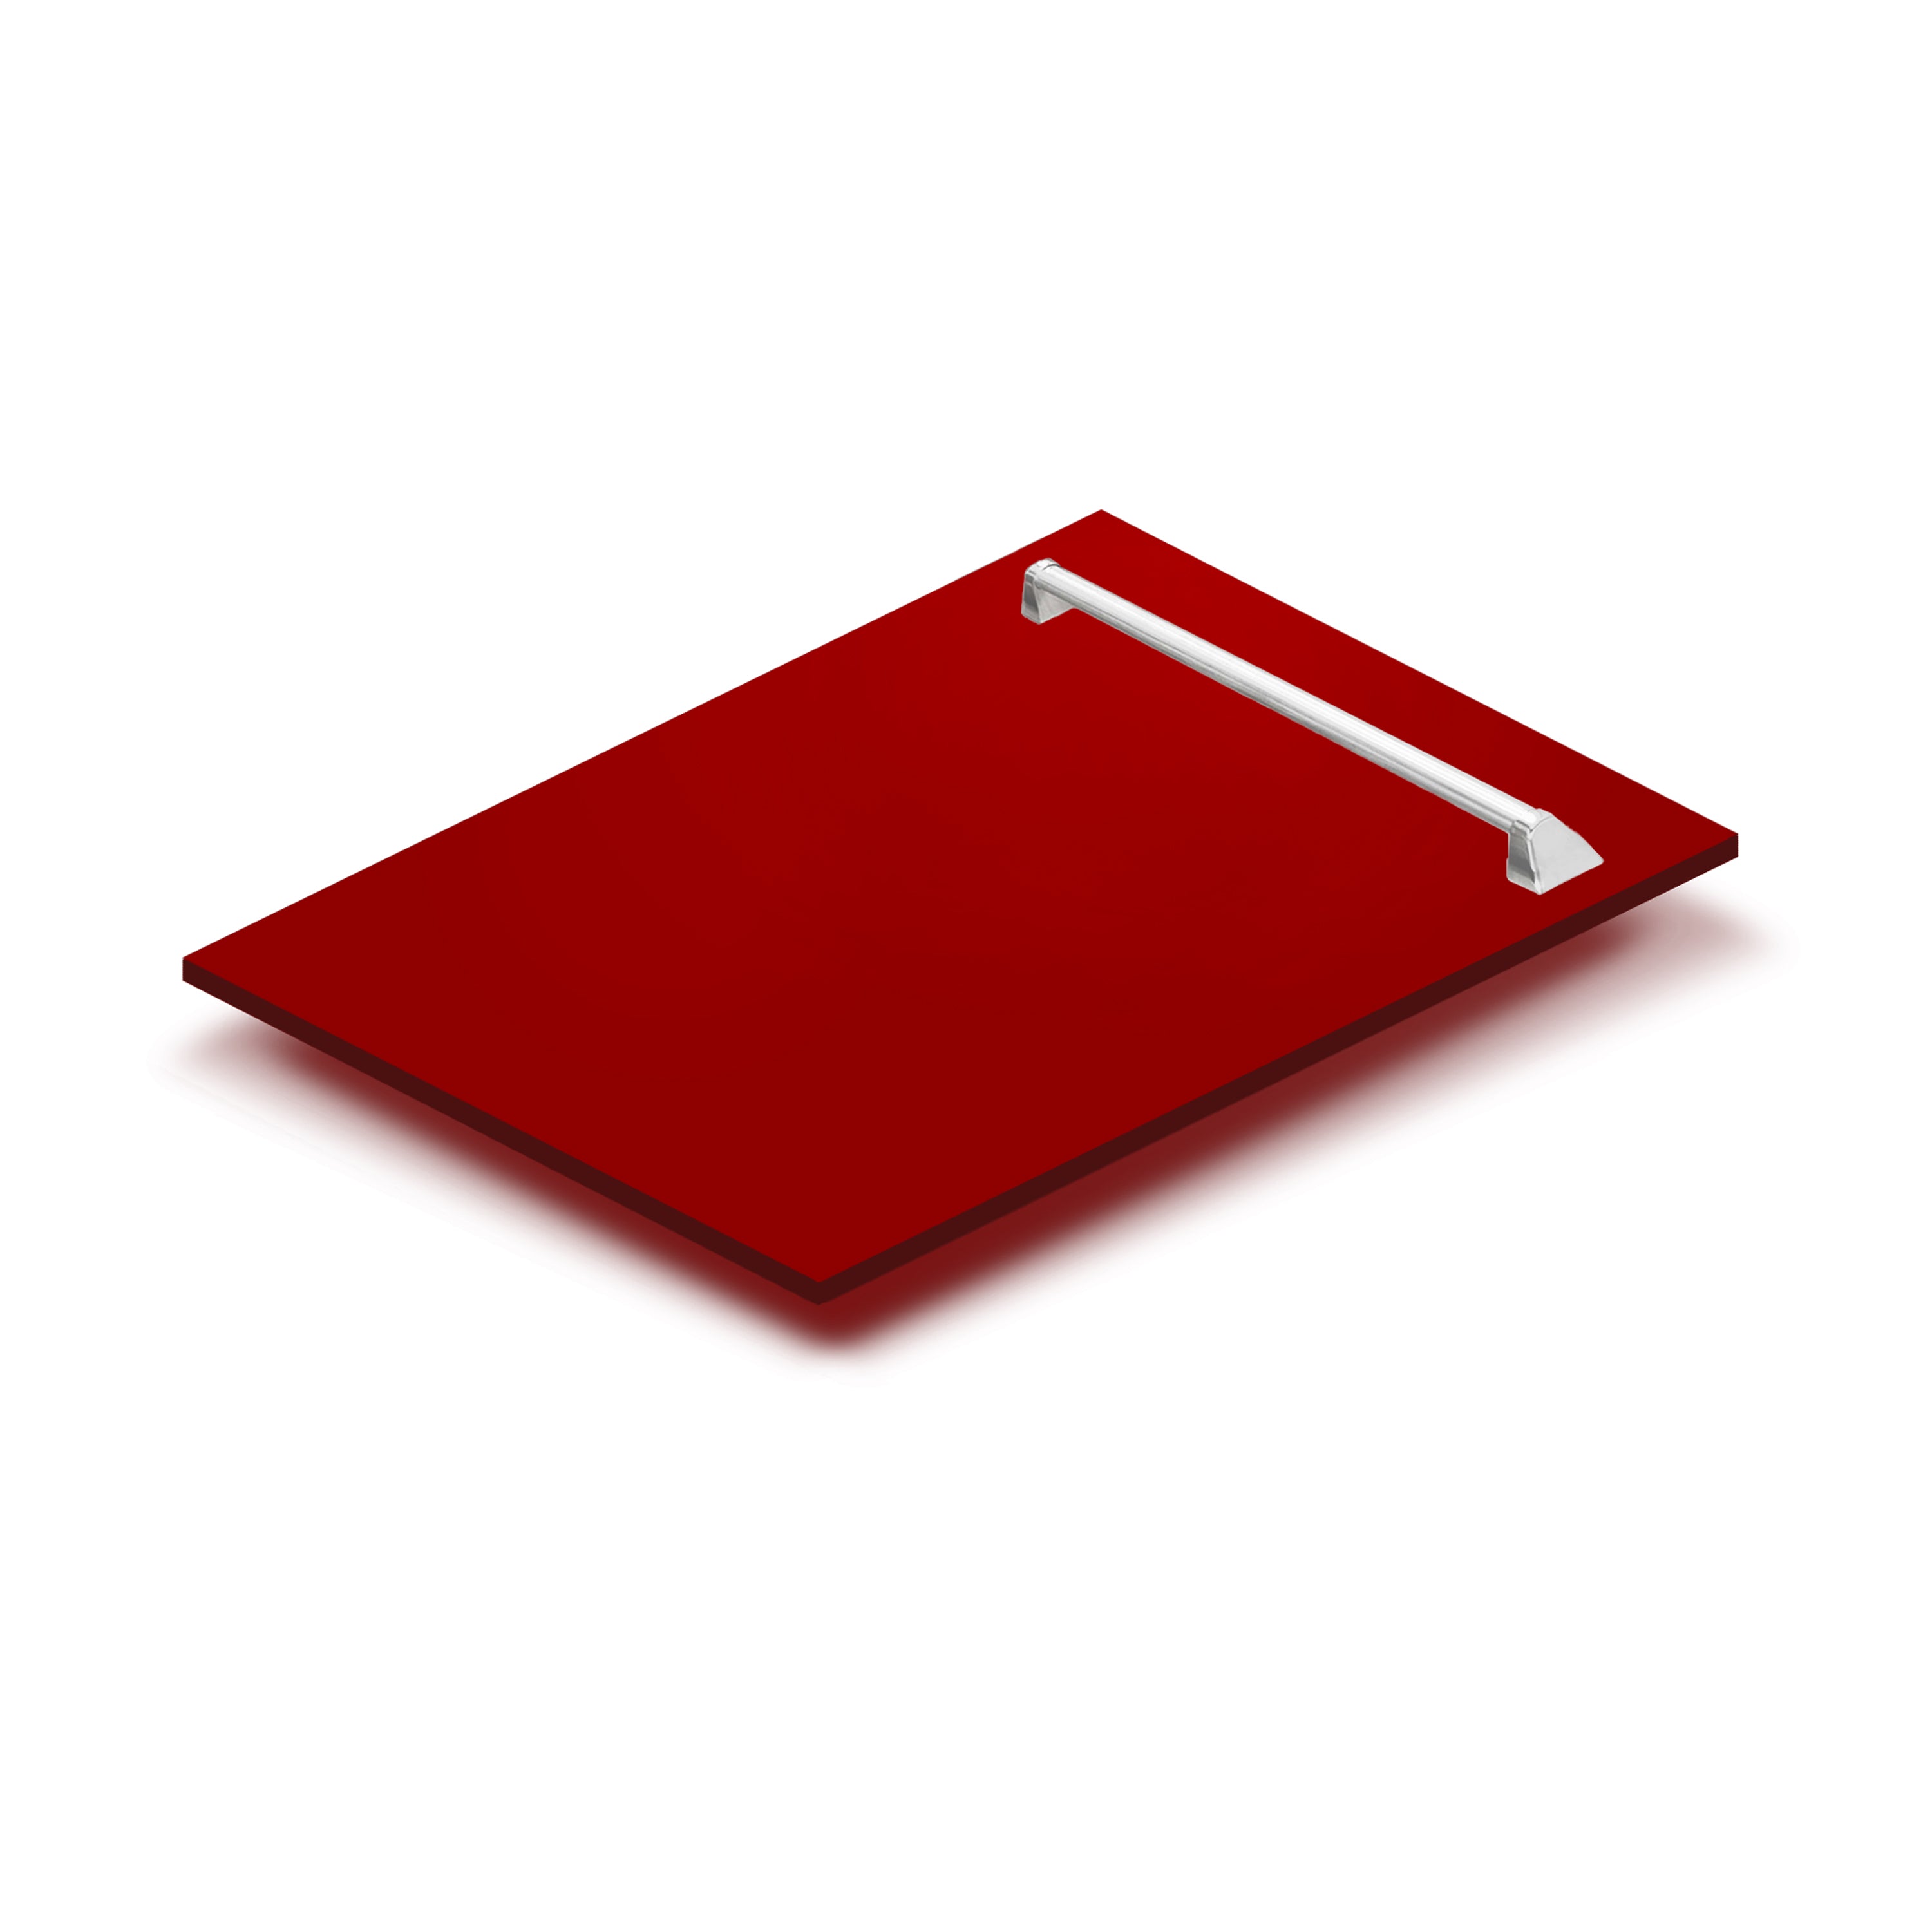 ZLINE 18" Tallac Dishwasher Panel in Red Gloss with Traditional Handle (DPV-RG-18)